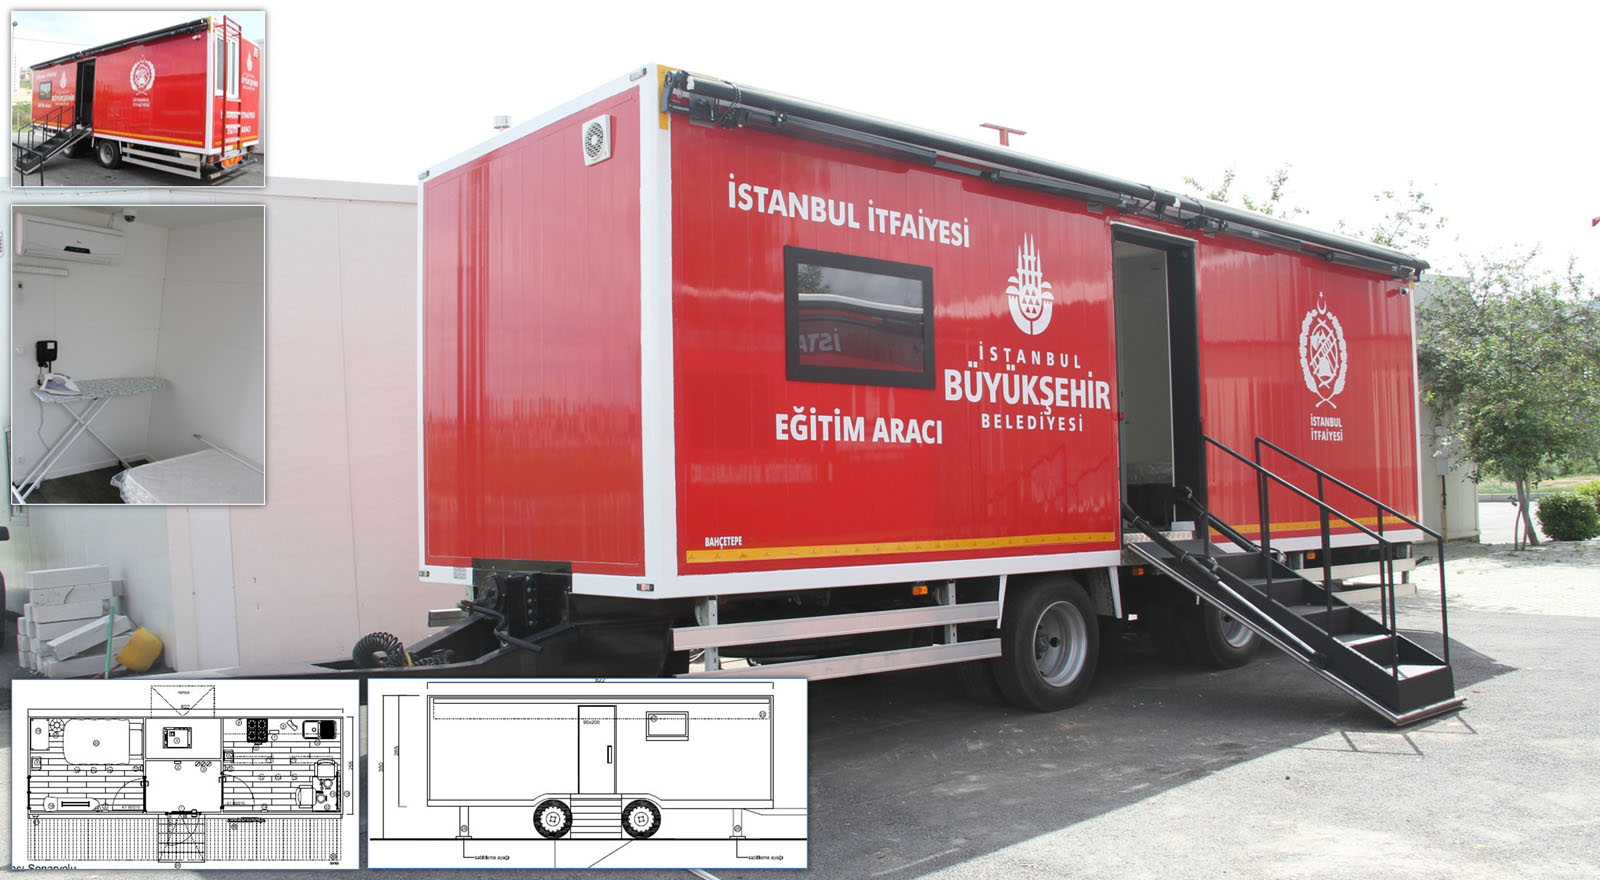 Our Vehicles - Istanbul Fire Department